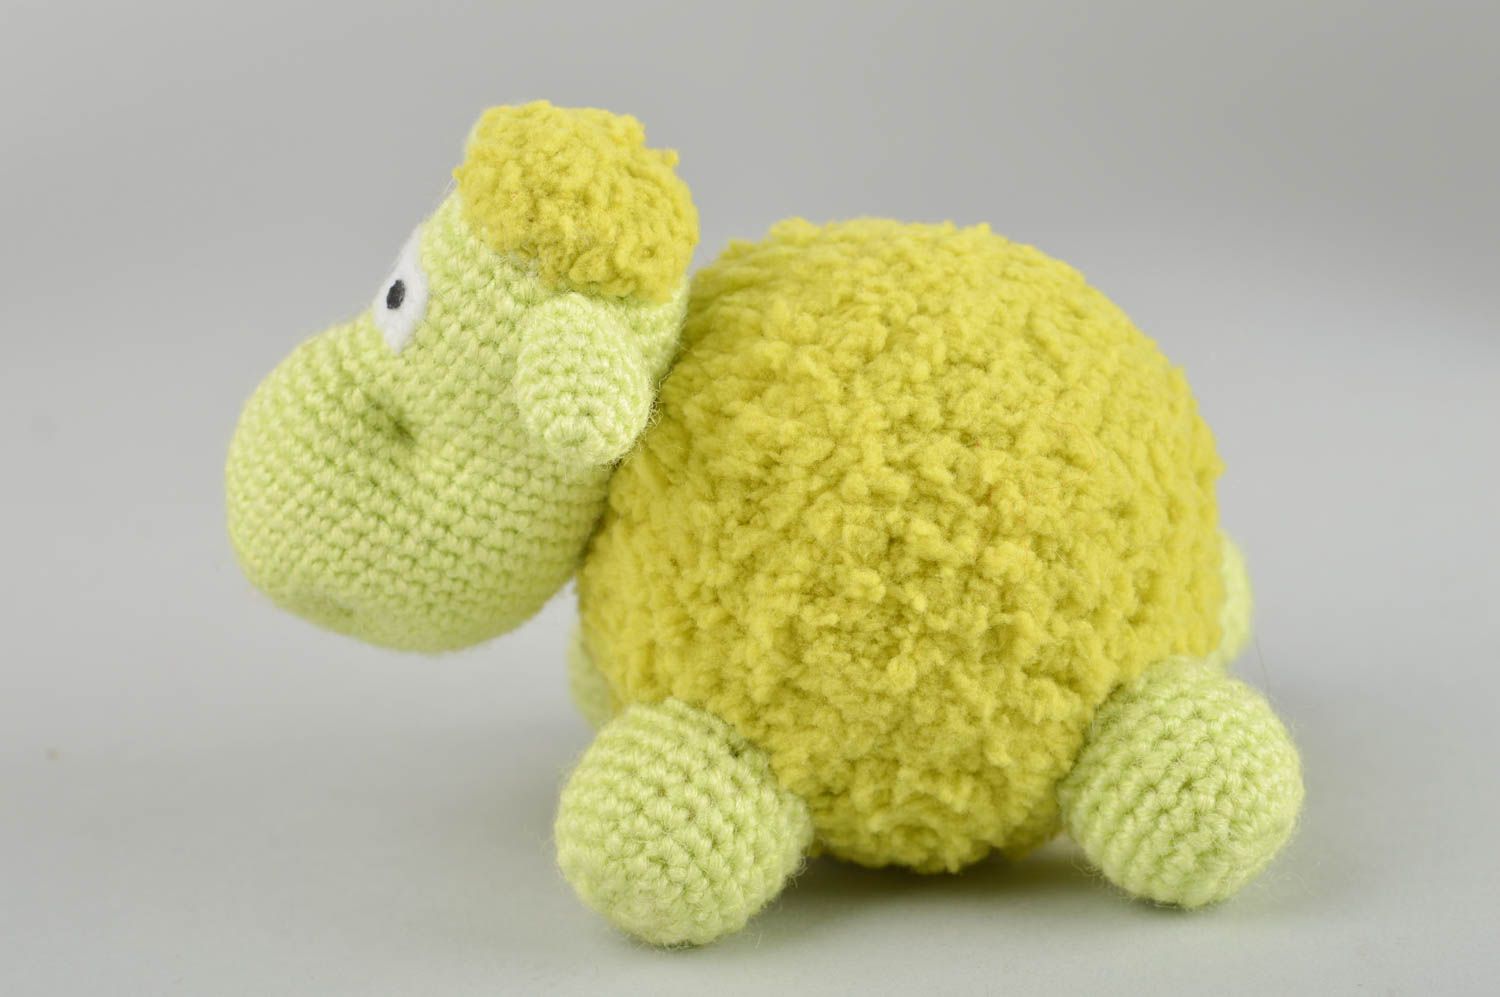 Handmade soft toy lamb toy crochet toy gifts for kids nursery decorating ideas photo 2